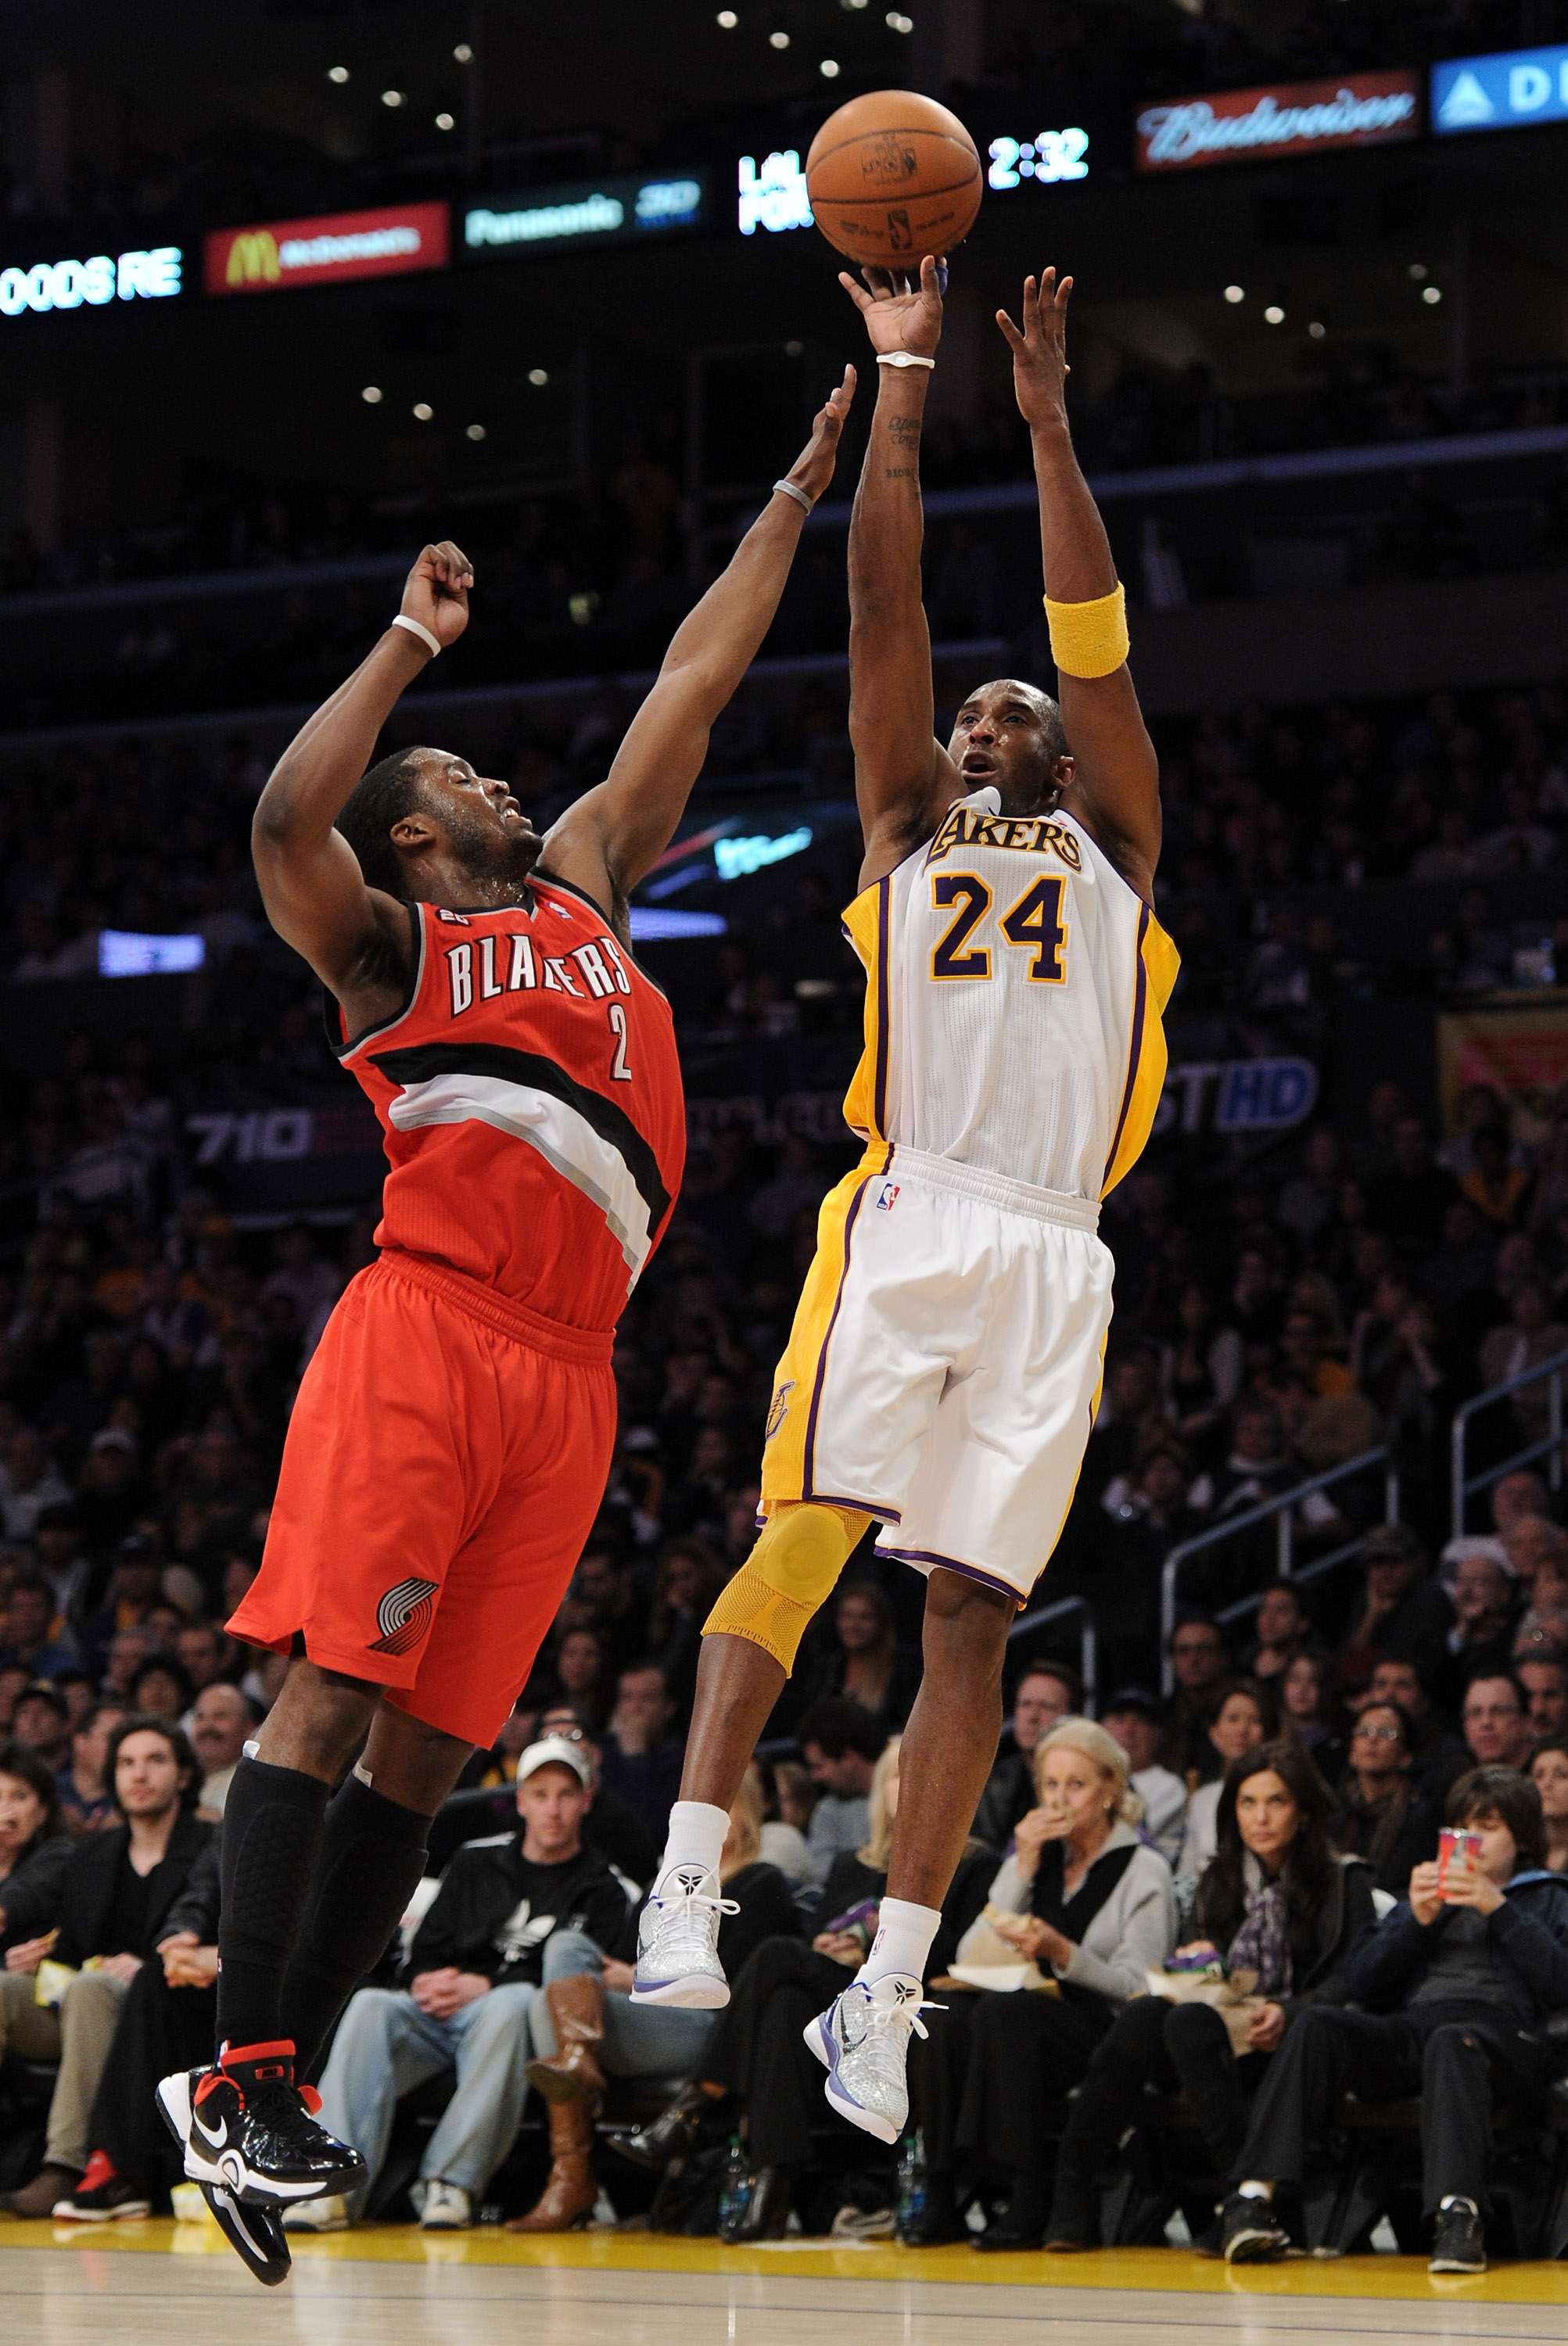 LOS ANGELES, CA - MARCH 20:  Kobe Bryant #24 of the Los Angeles Lakers shoots a jumper over Wesley Matthews #2 of the Portland Trail Blazers at the Staples Center on March 20, 2011 in Los Angeles, California.  NOTE TO USER: User expressly acknowledges and